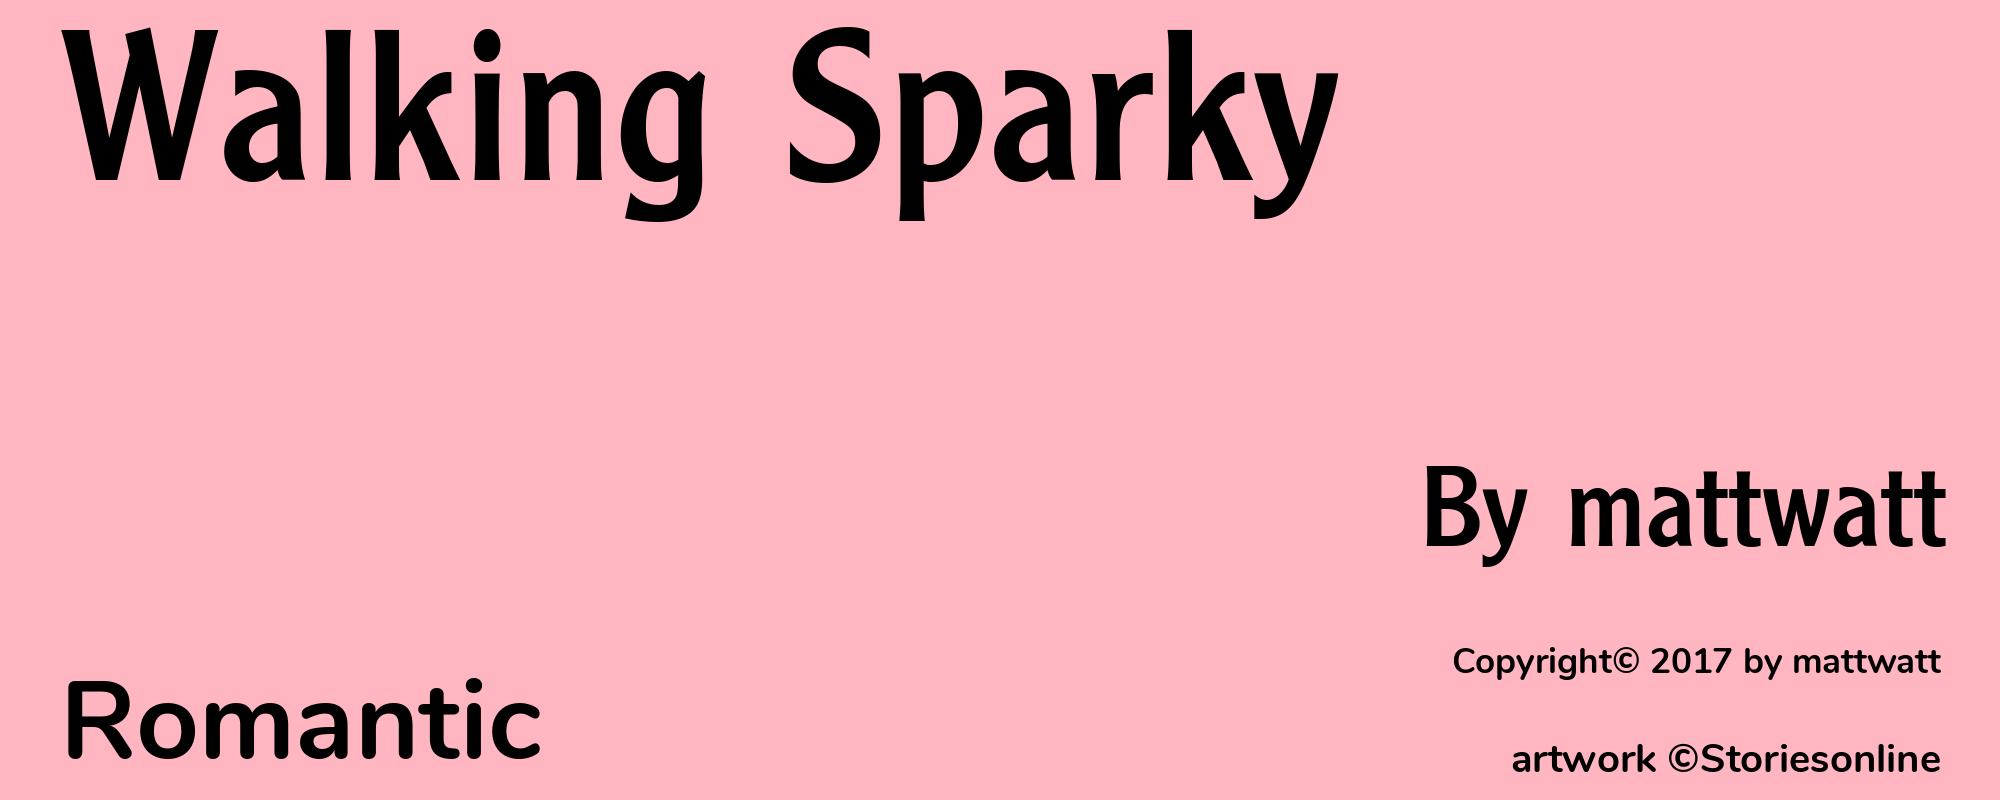 Walking Sparky - Cover